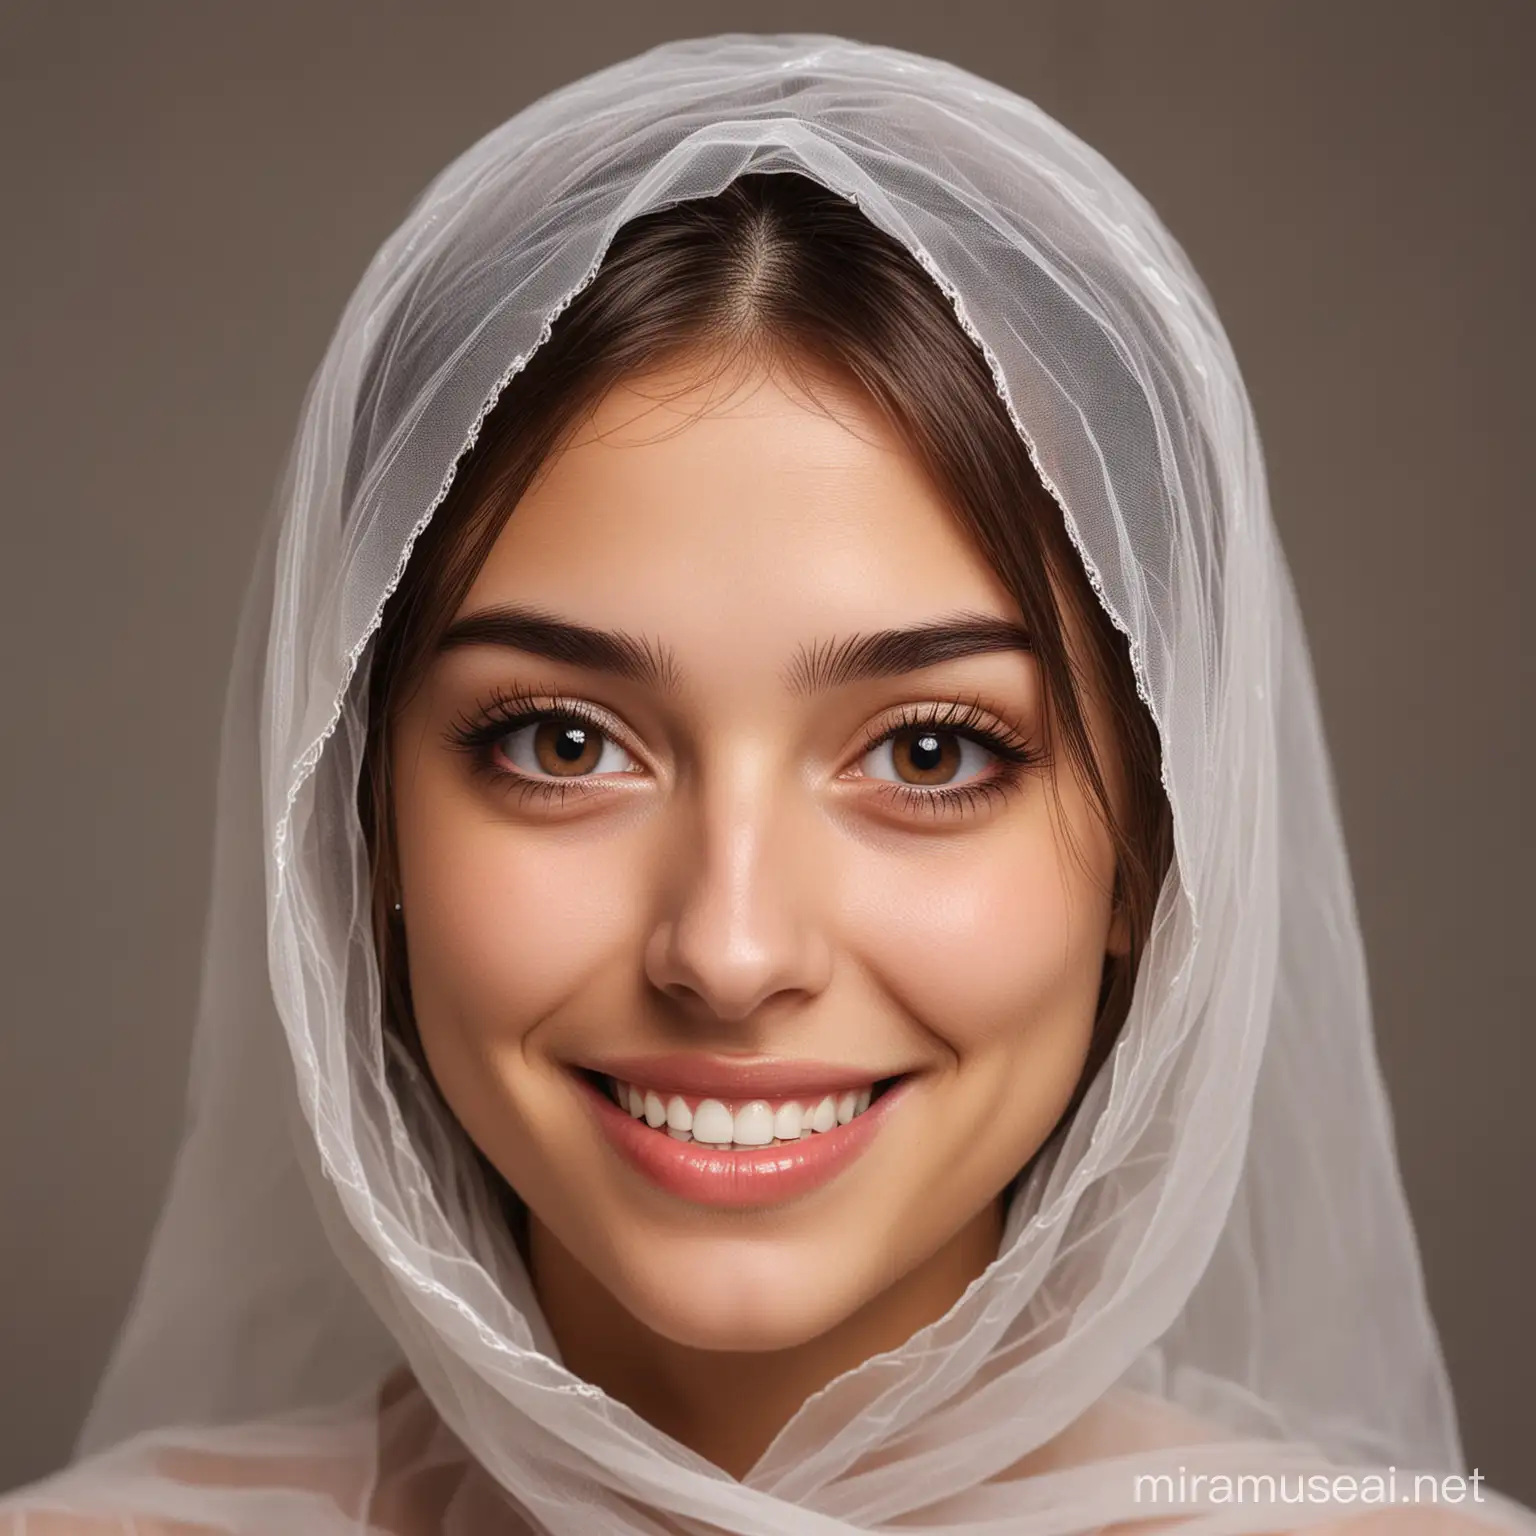 Veiled Girl with Piercing Gaze and Bright Smile